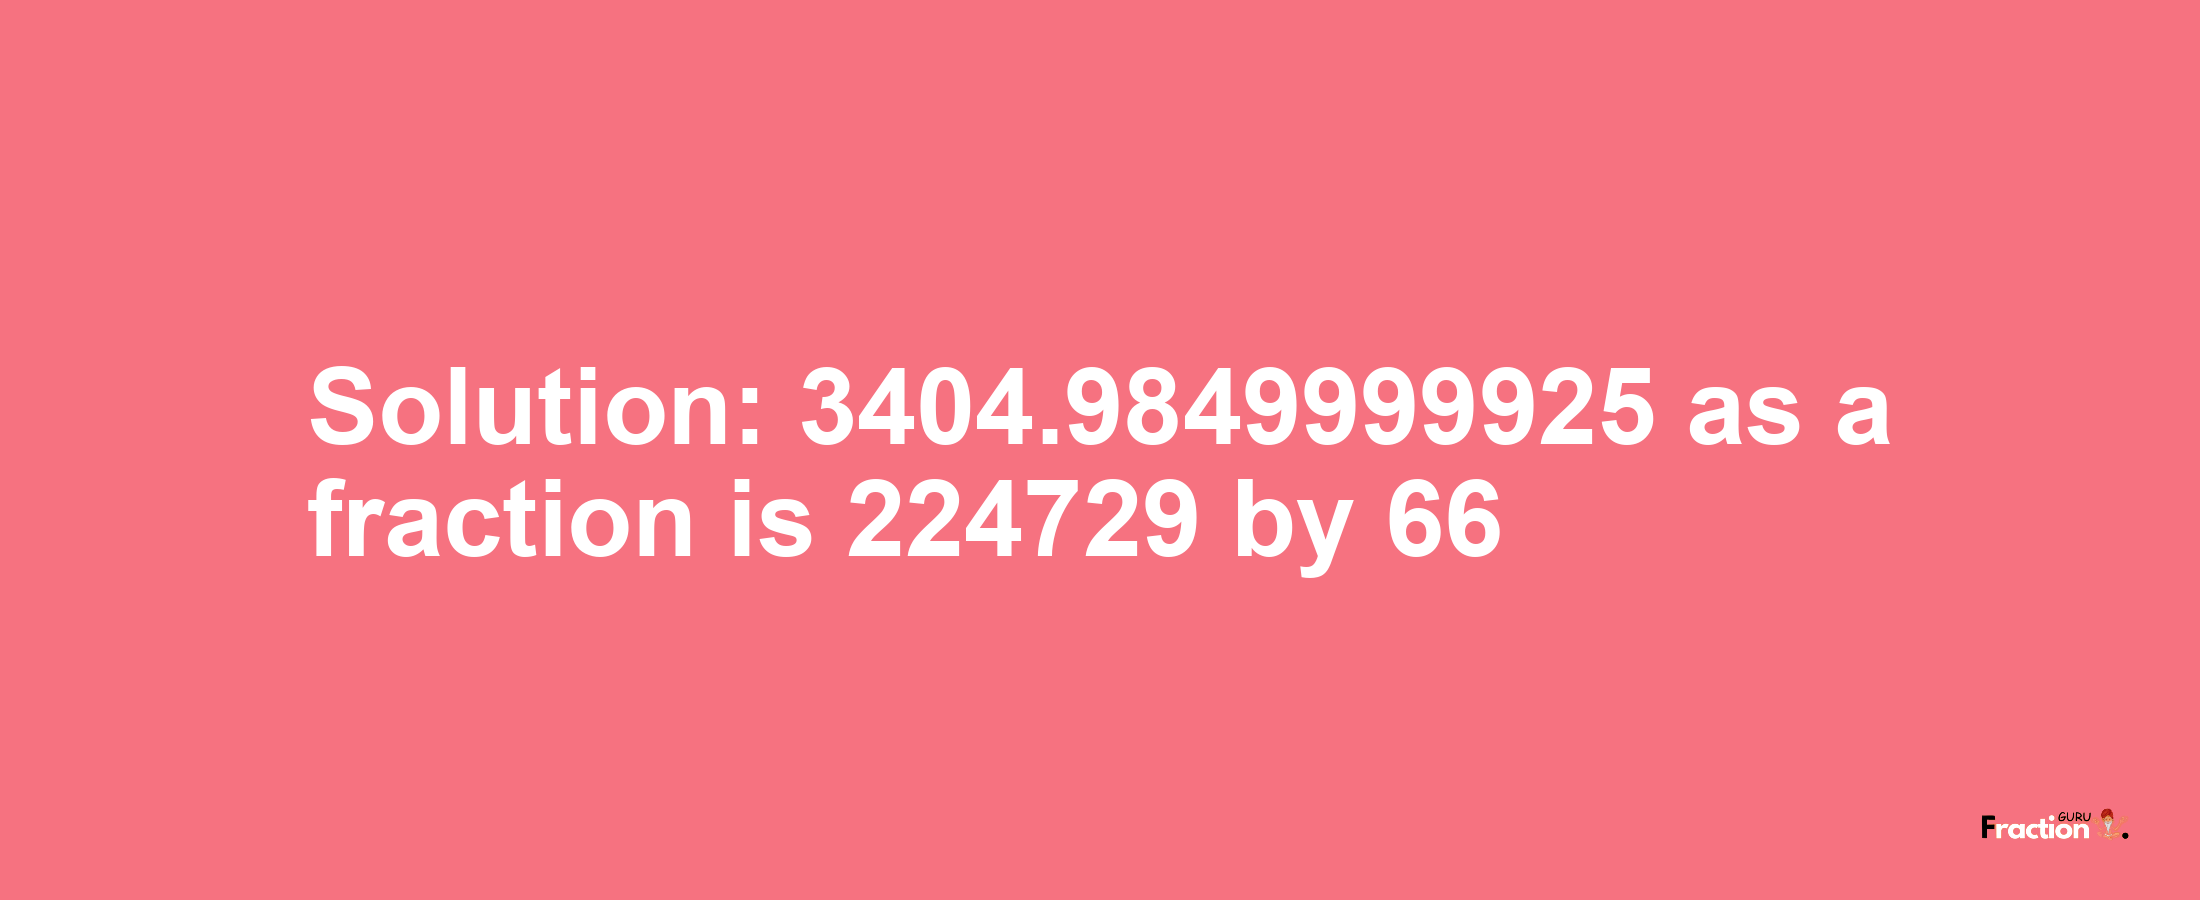 Solution:3404.9849999925 as a fraction is 224729/66